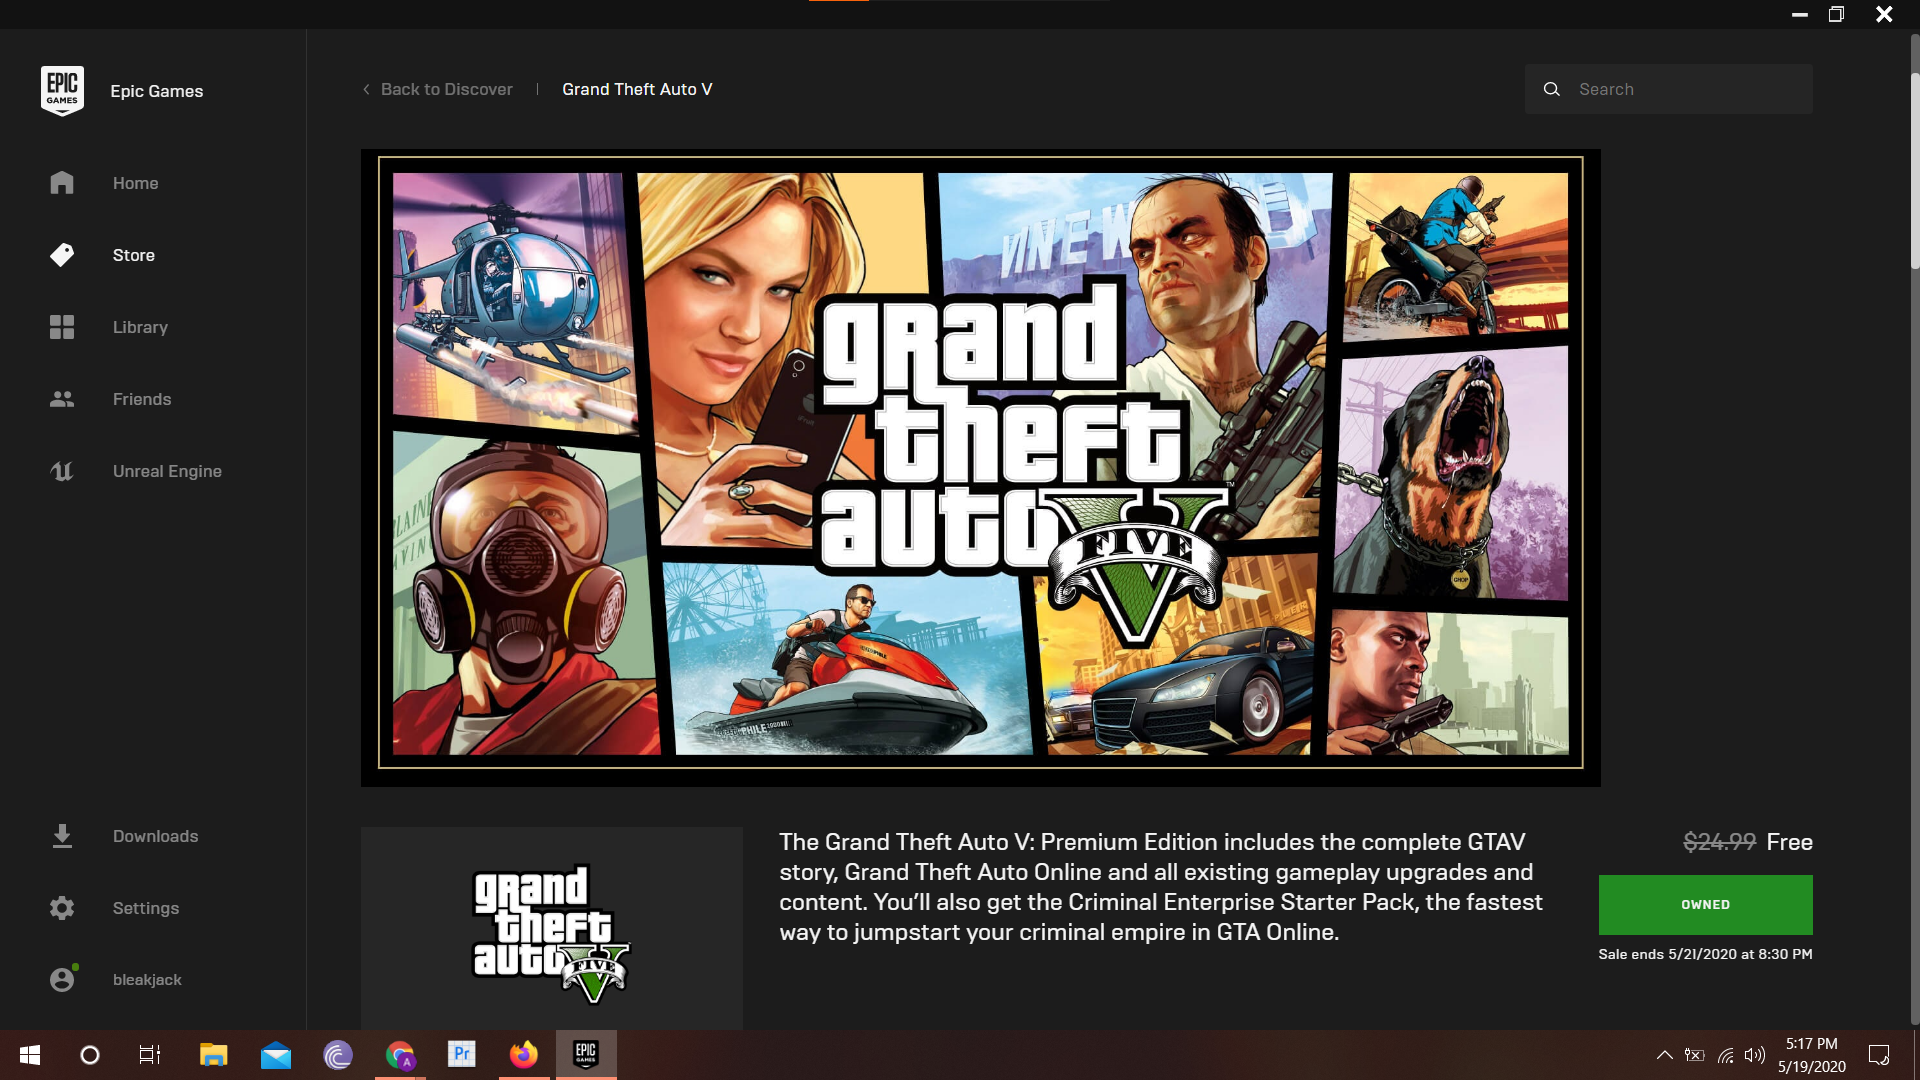 gta 5 free download for pc without license key 2020